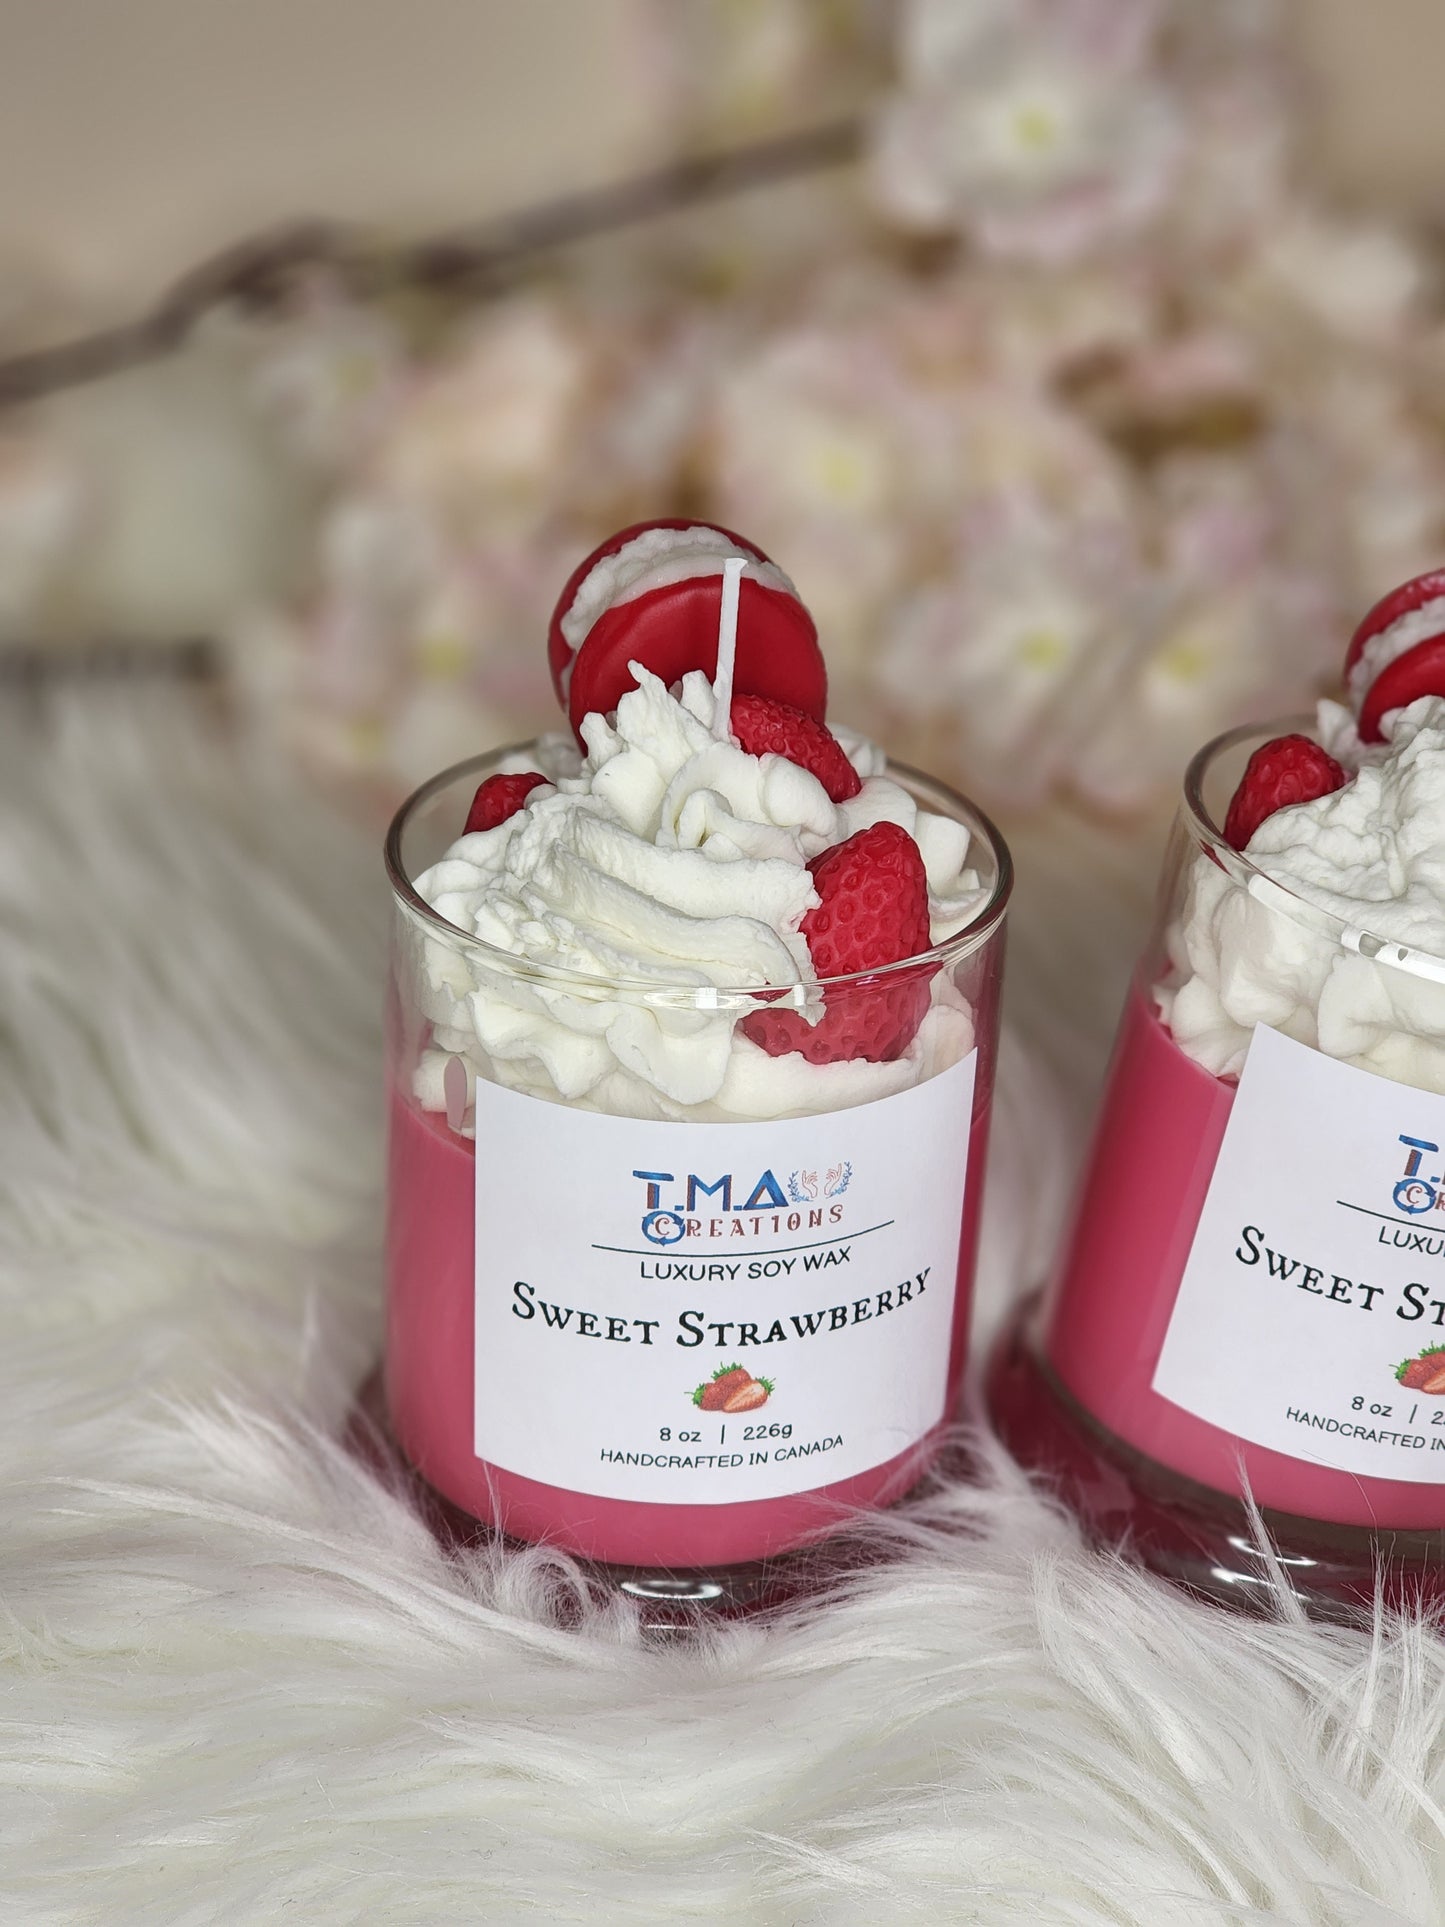 "Sweet Strawberry" Candle